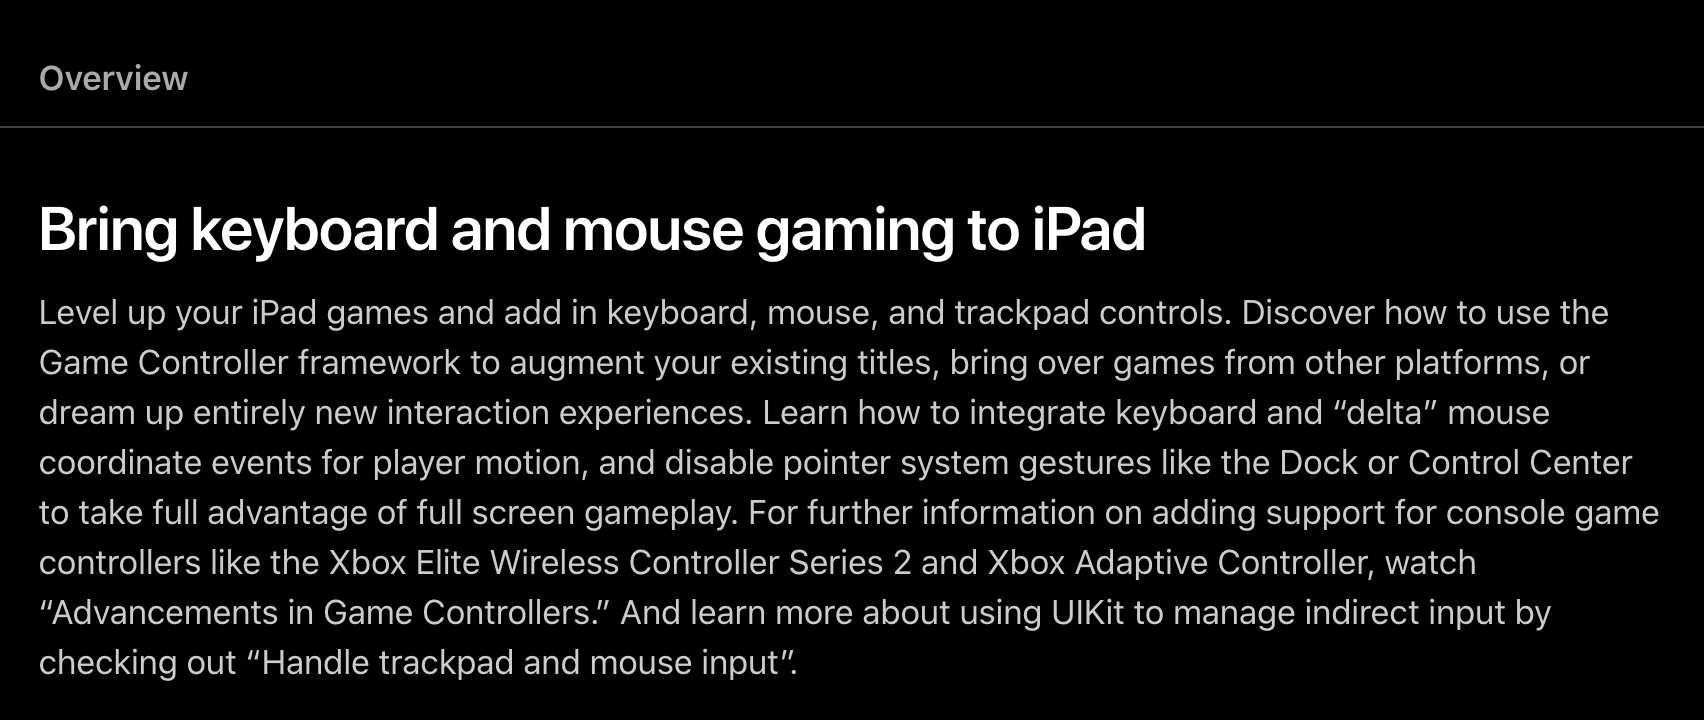 iPadOS 14 brings keyboard and mouse support for games